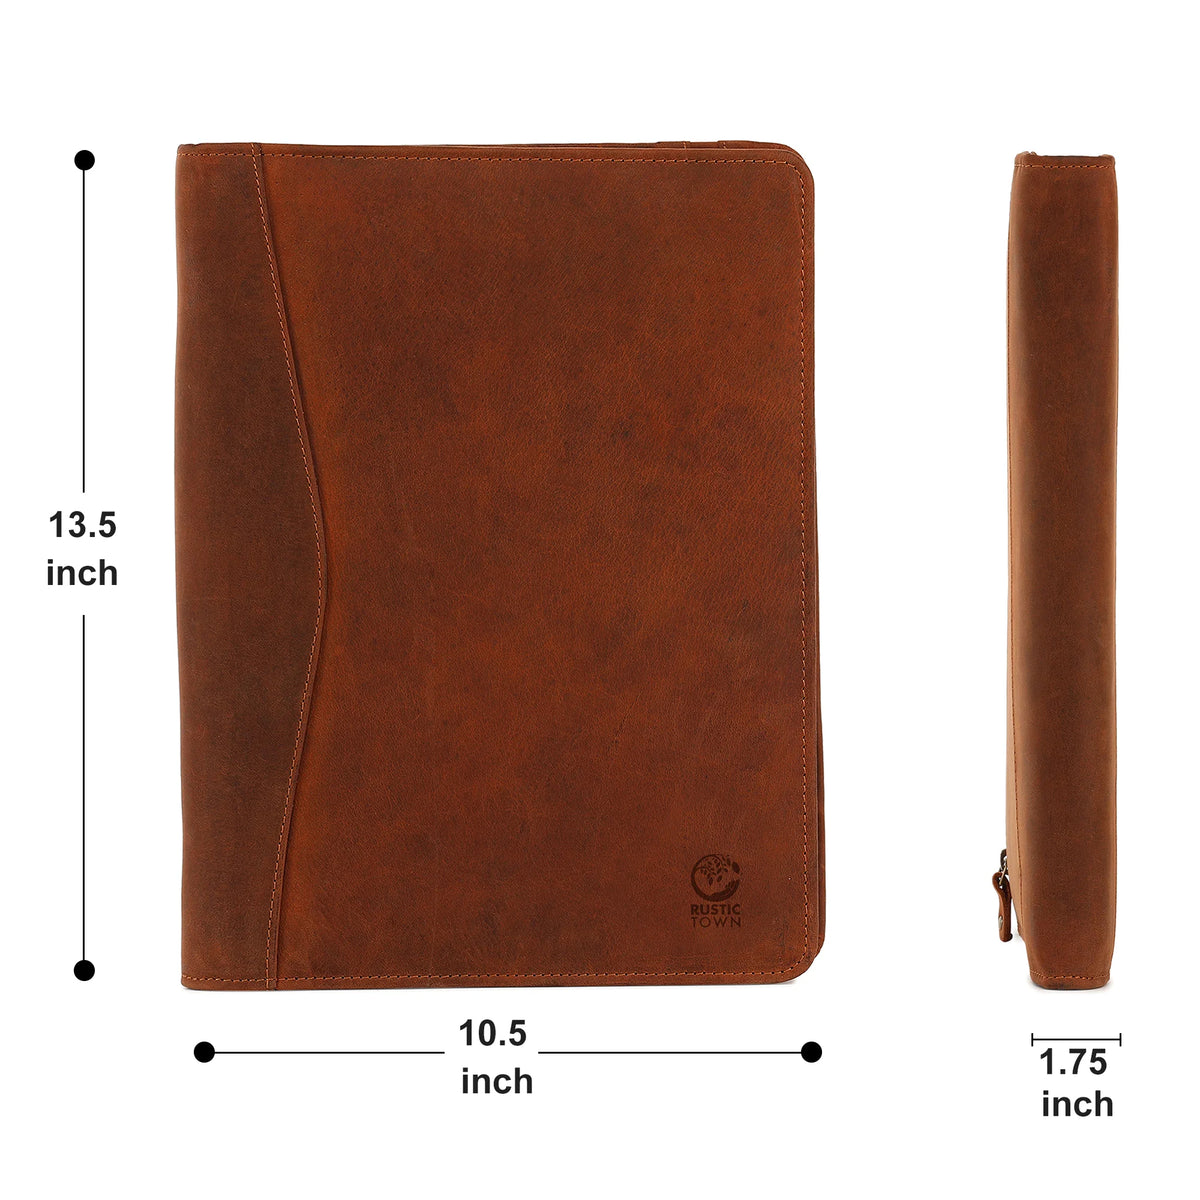 Handmade Leather Luxury Business Portfolio by Rustic Town | Professional Organizer Gift for Men & Women | Durable Leather Padfolio 3 + 1 Sleeves for